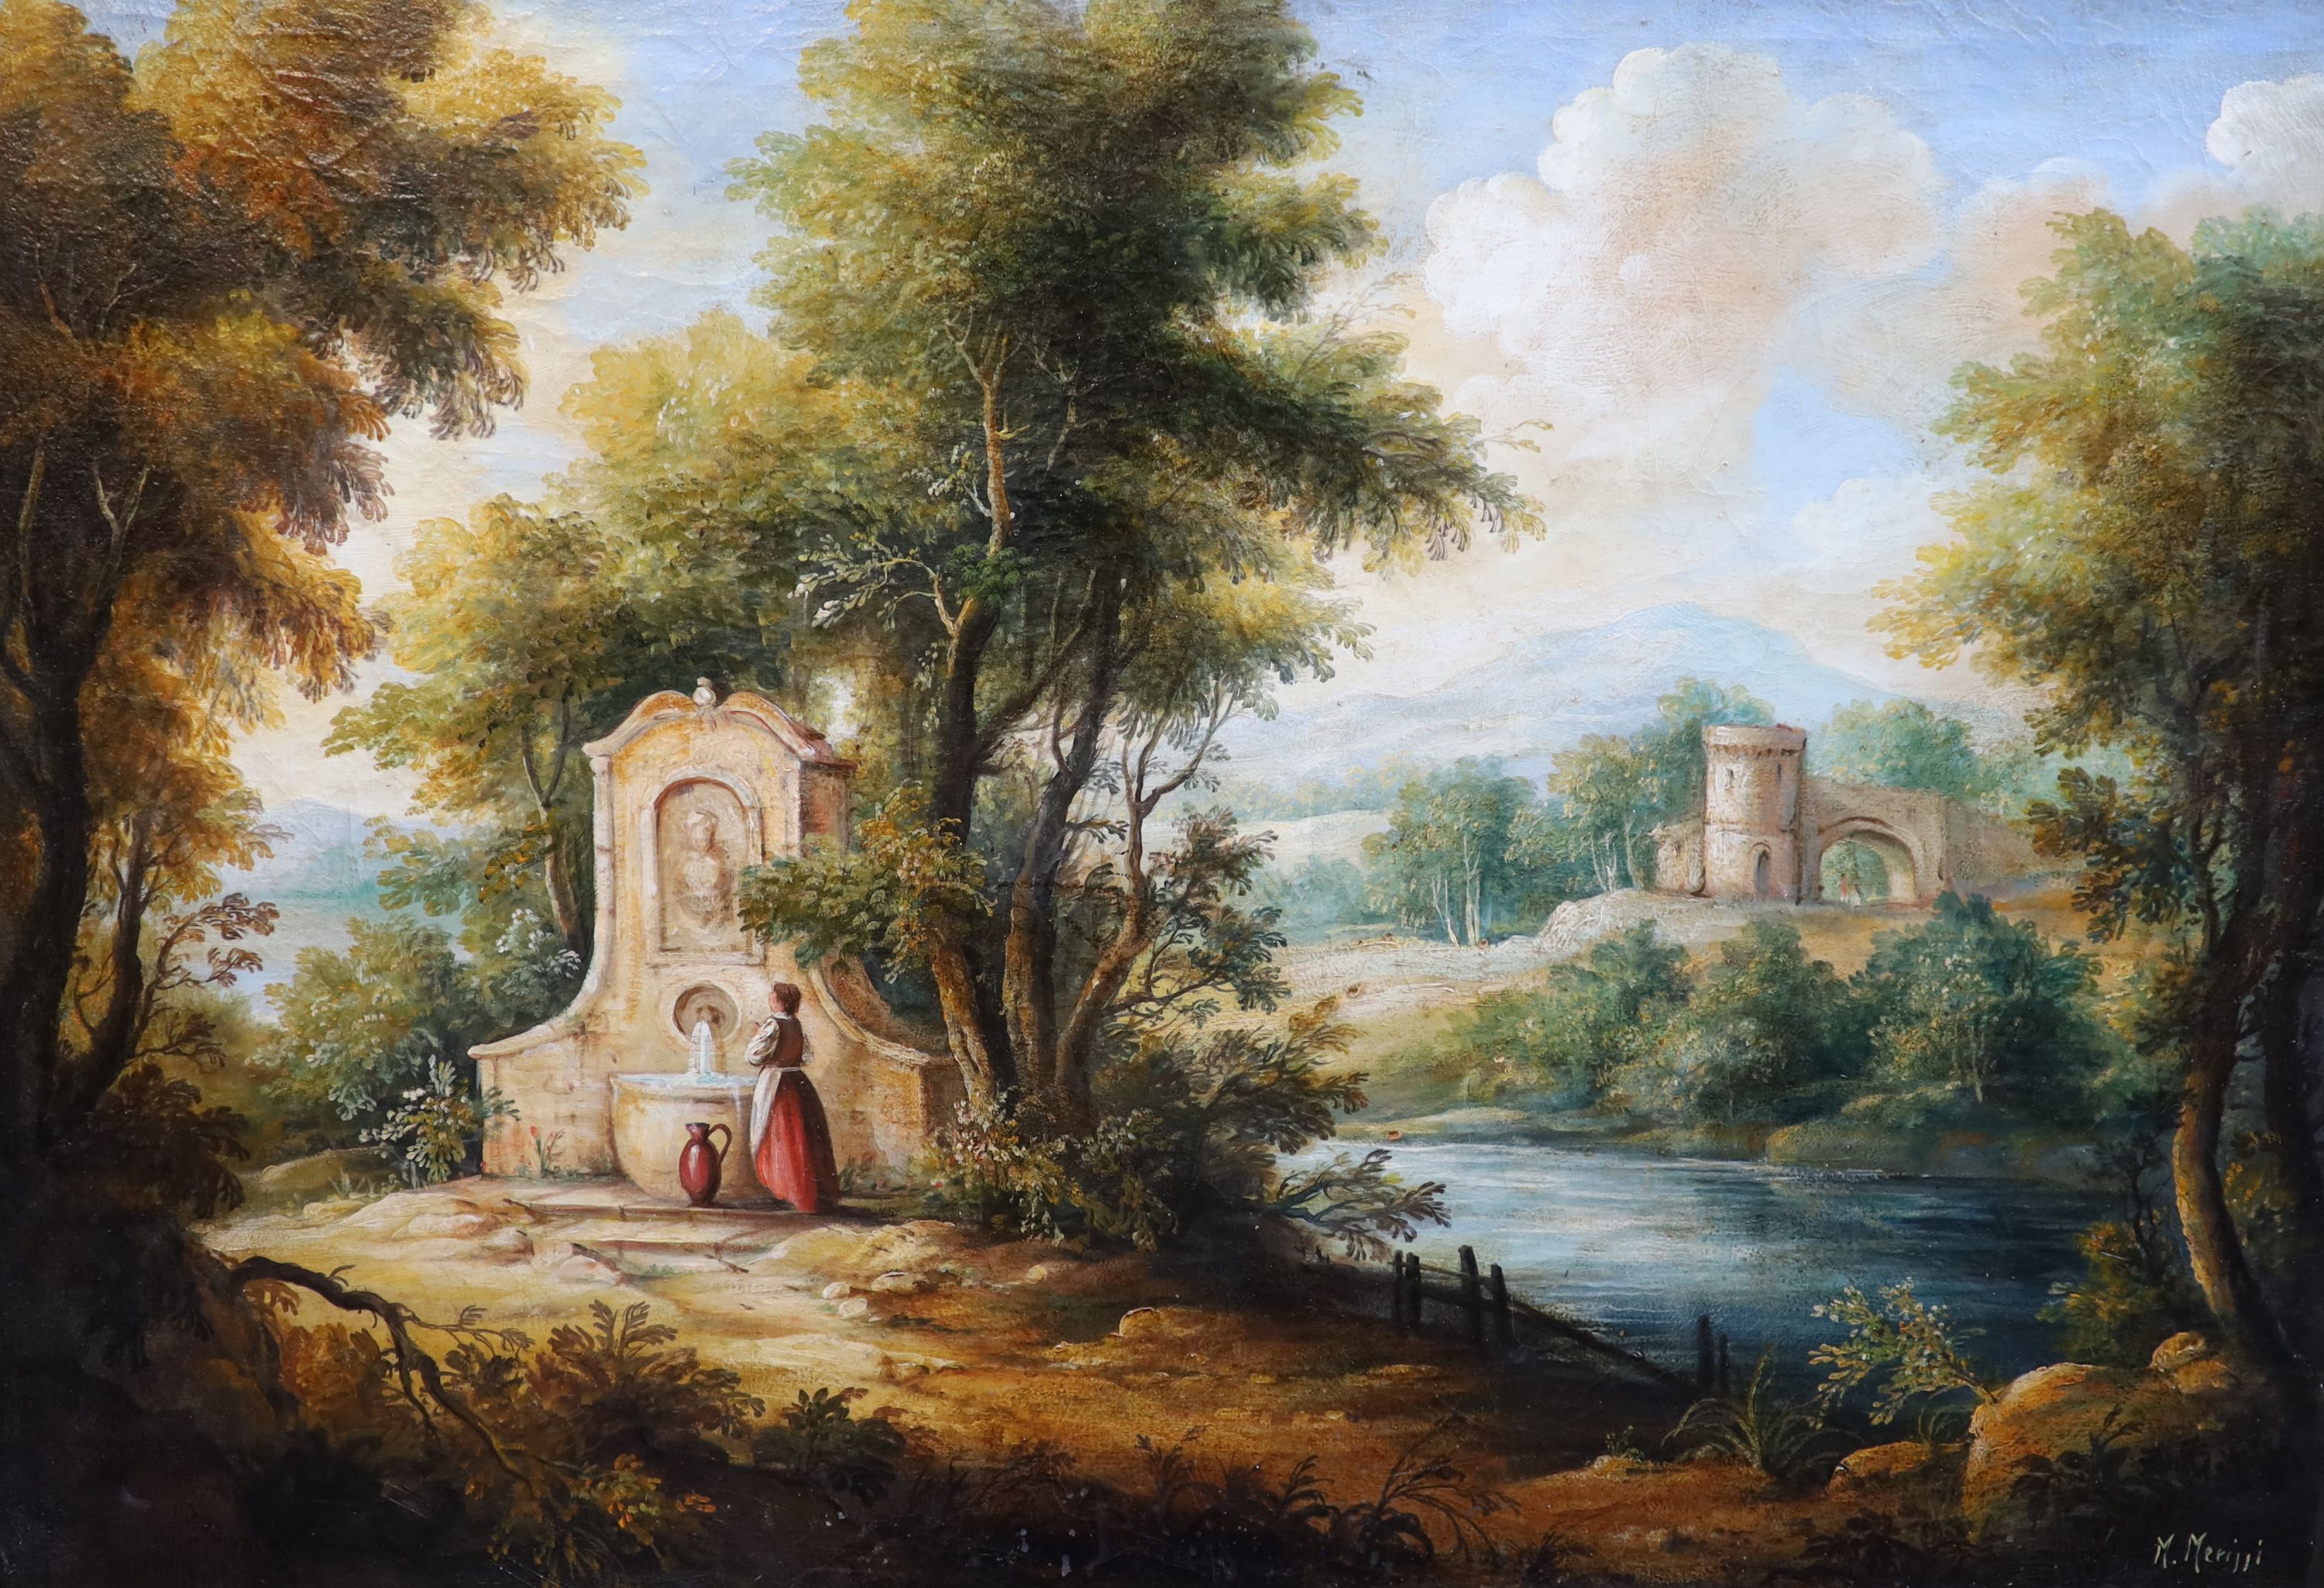 M. Merissi, oil on canvas, Italianate landscape with woman aqt a well, signed, 68 x 98cm